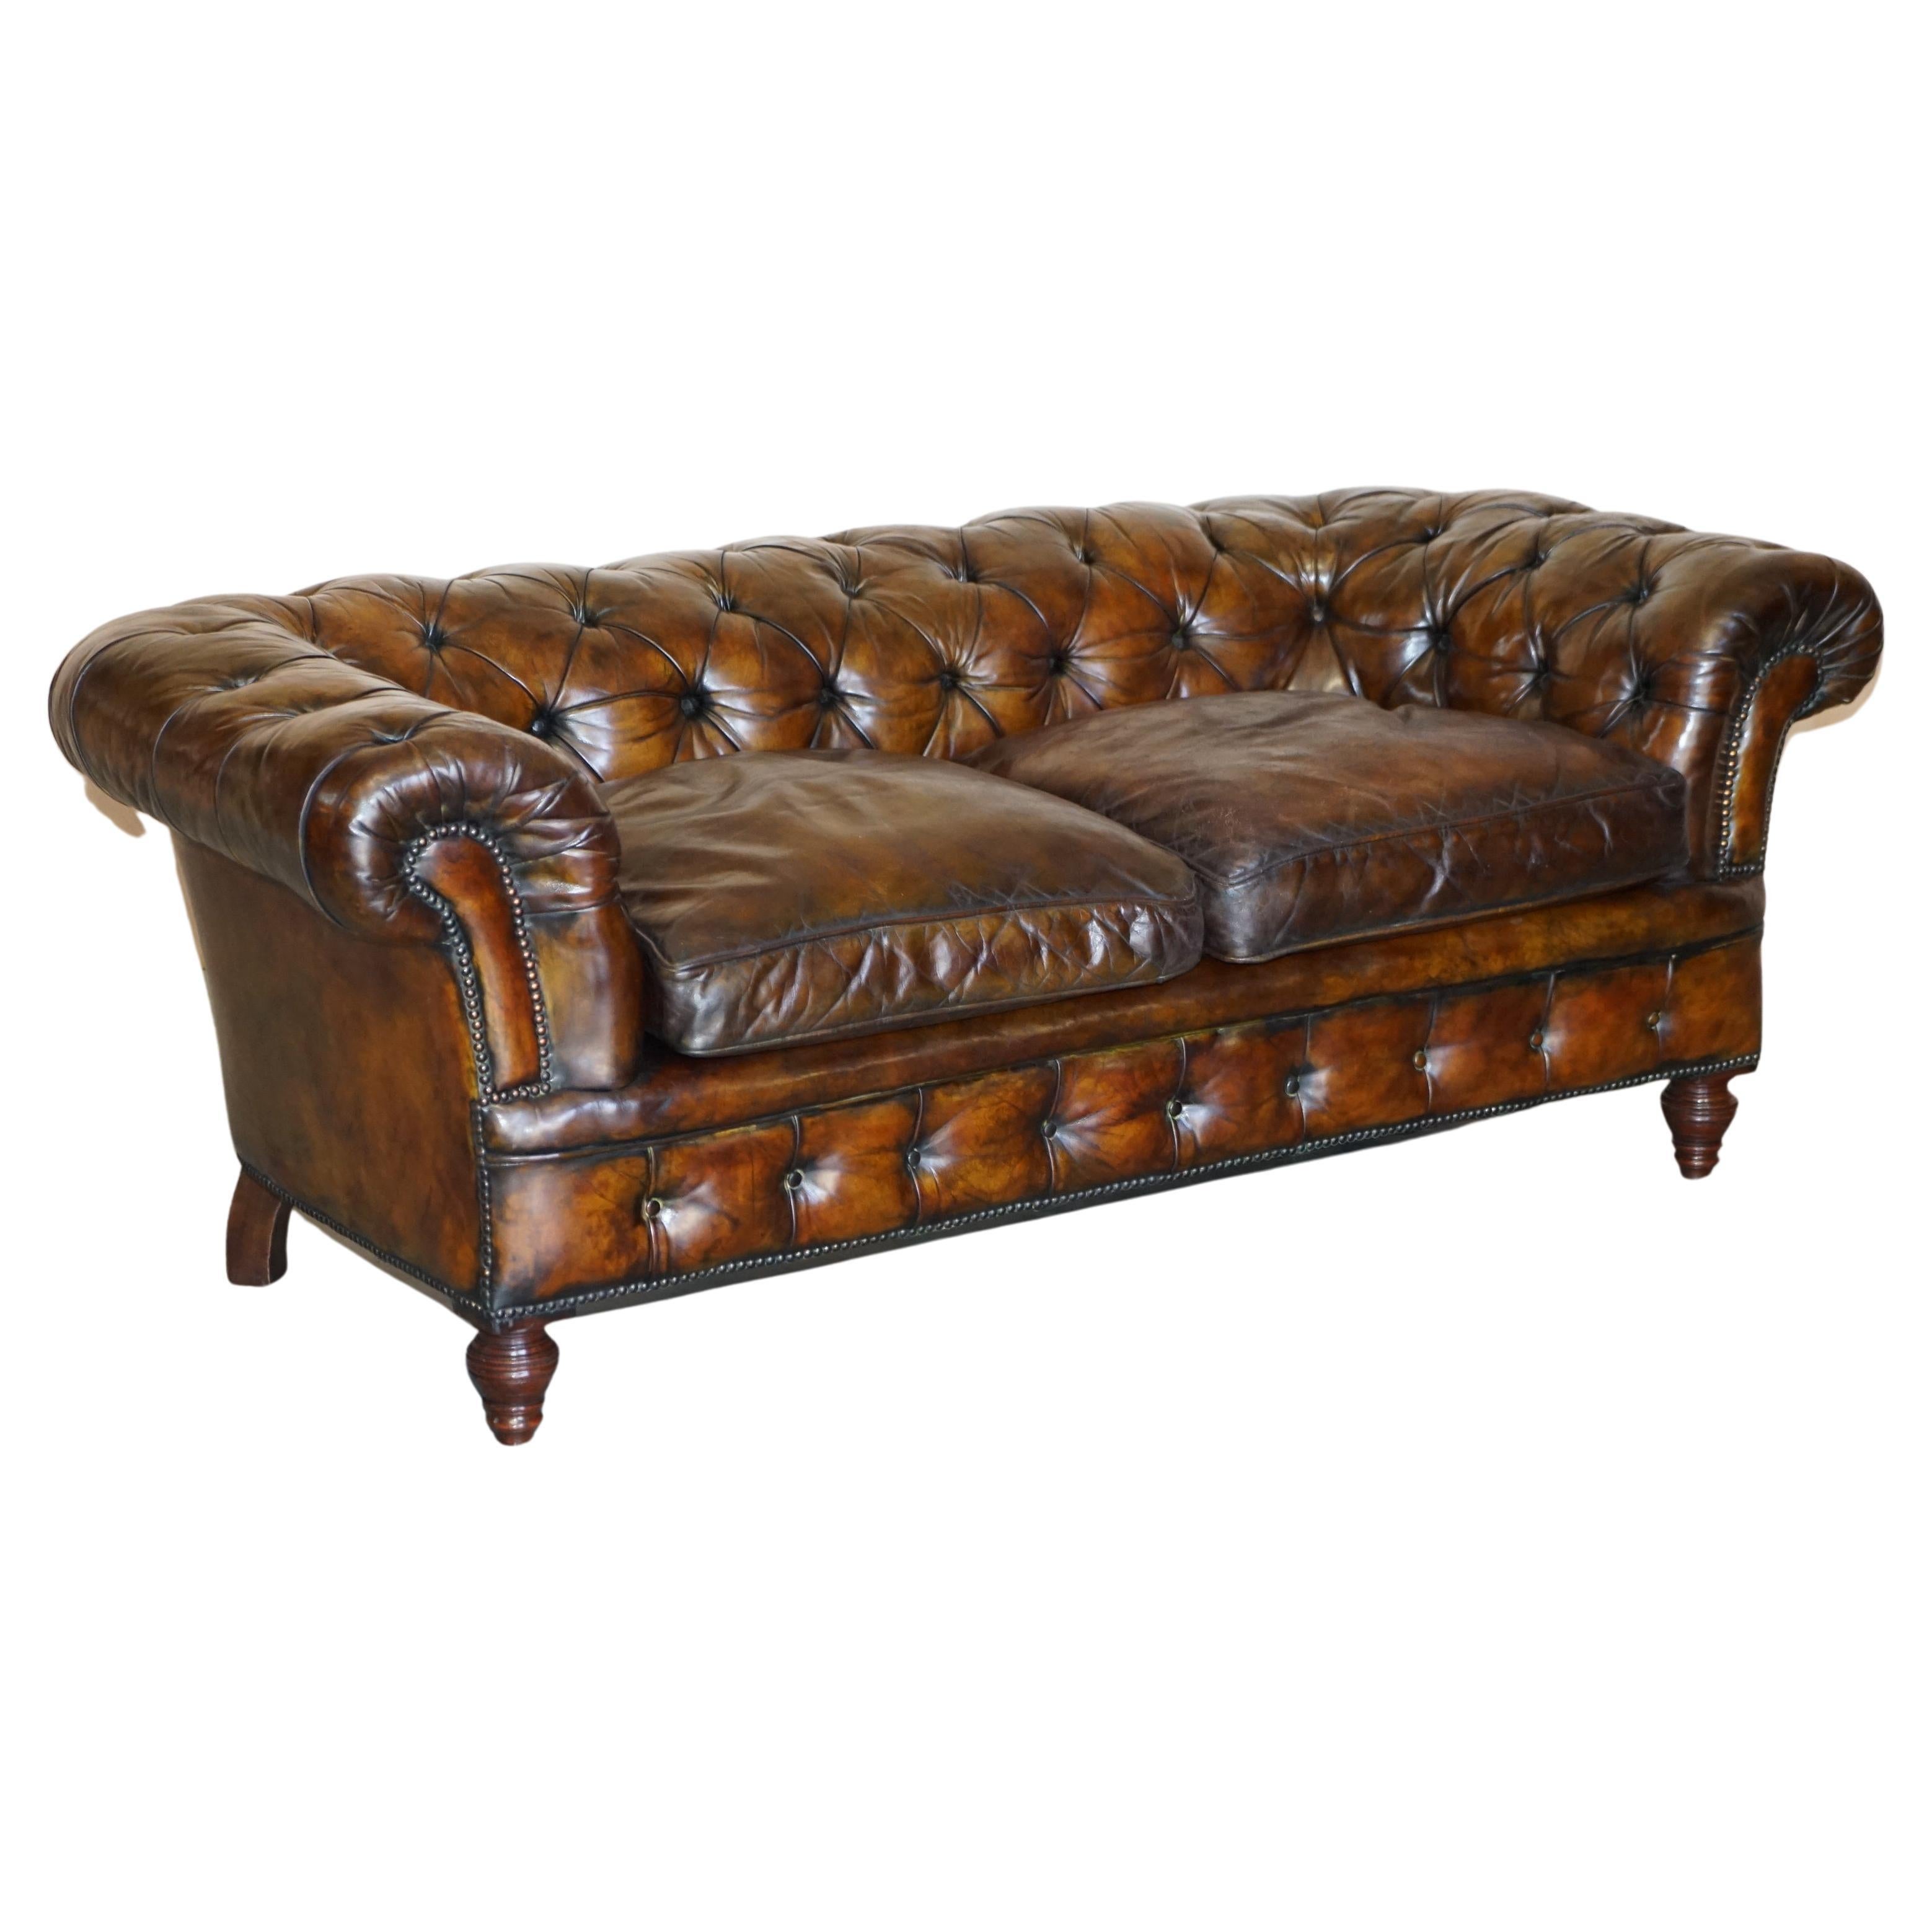 Antique Victorian Chesterfield Tufted Brown Leather Sofa Feather Filled Cushions For Sale